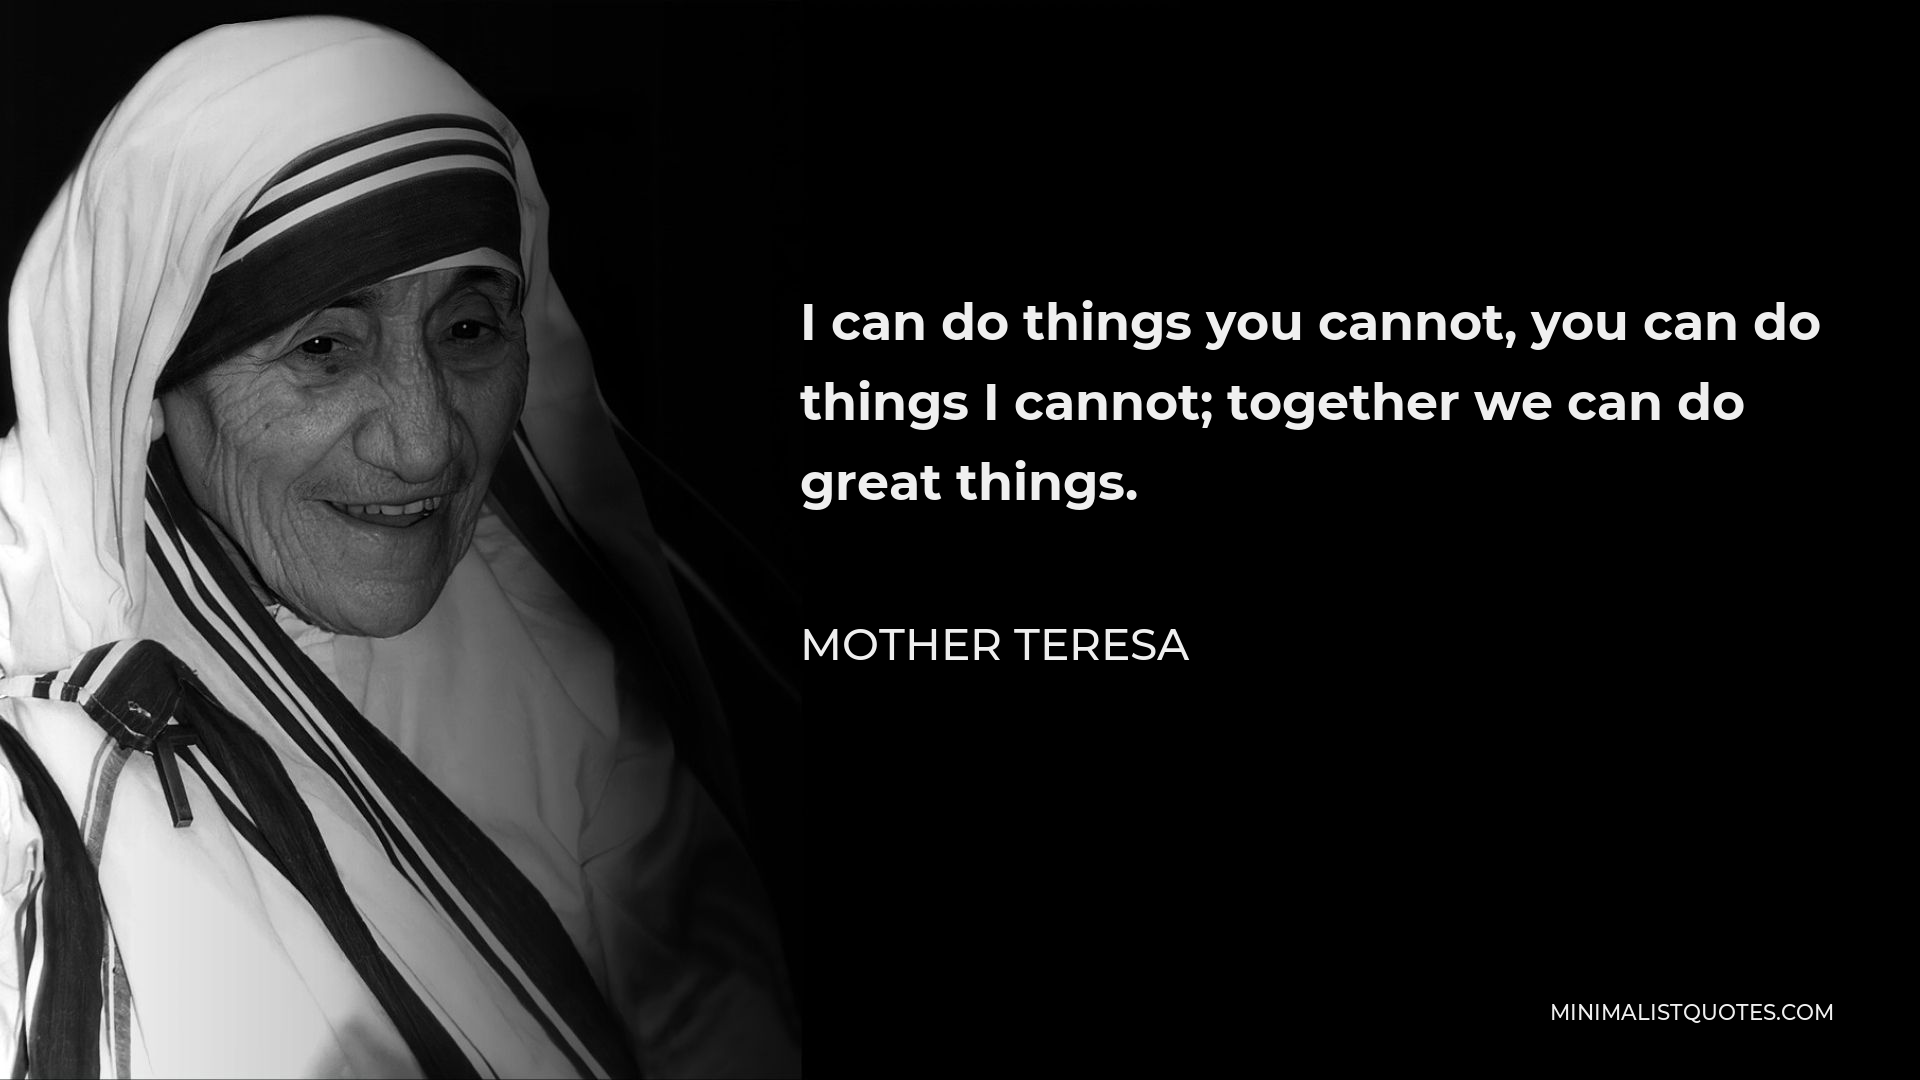 Mother Teresa Quote - I can do things you cannot, you can do things I cannot; together we can do great things.